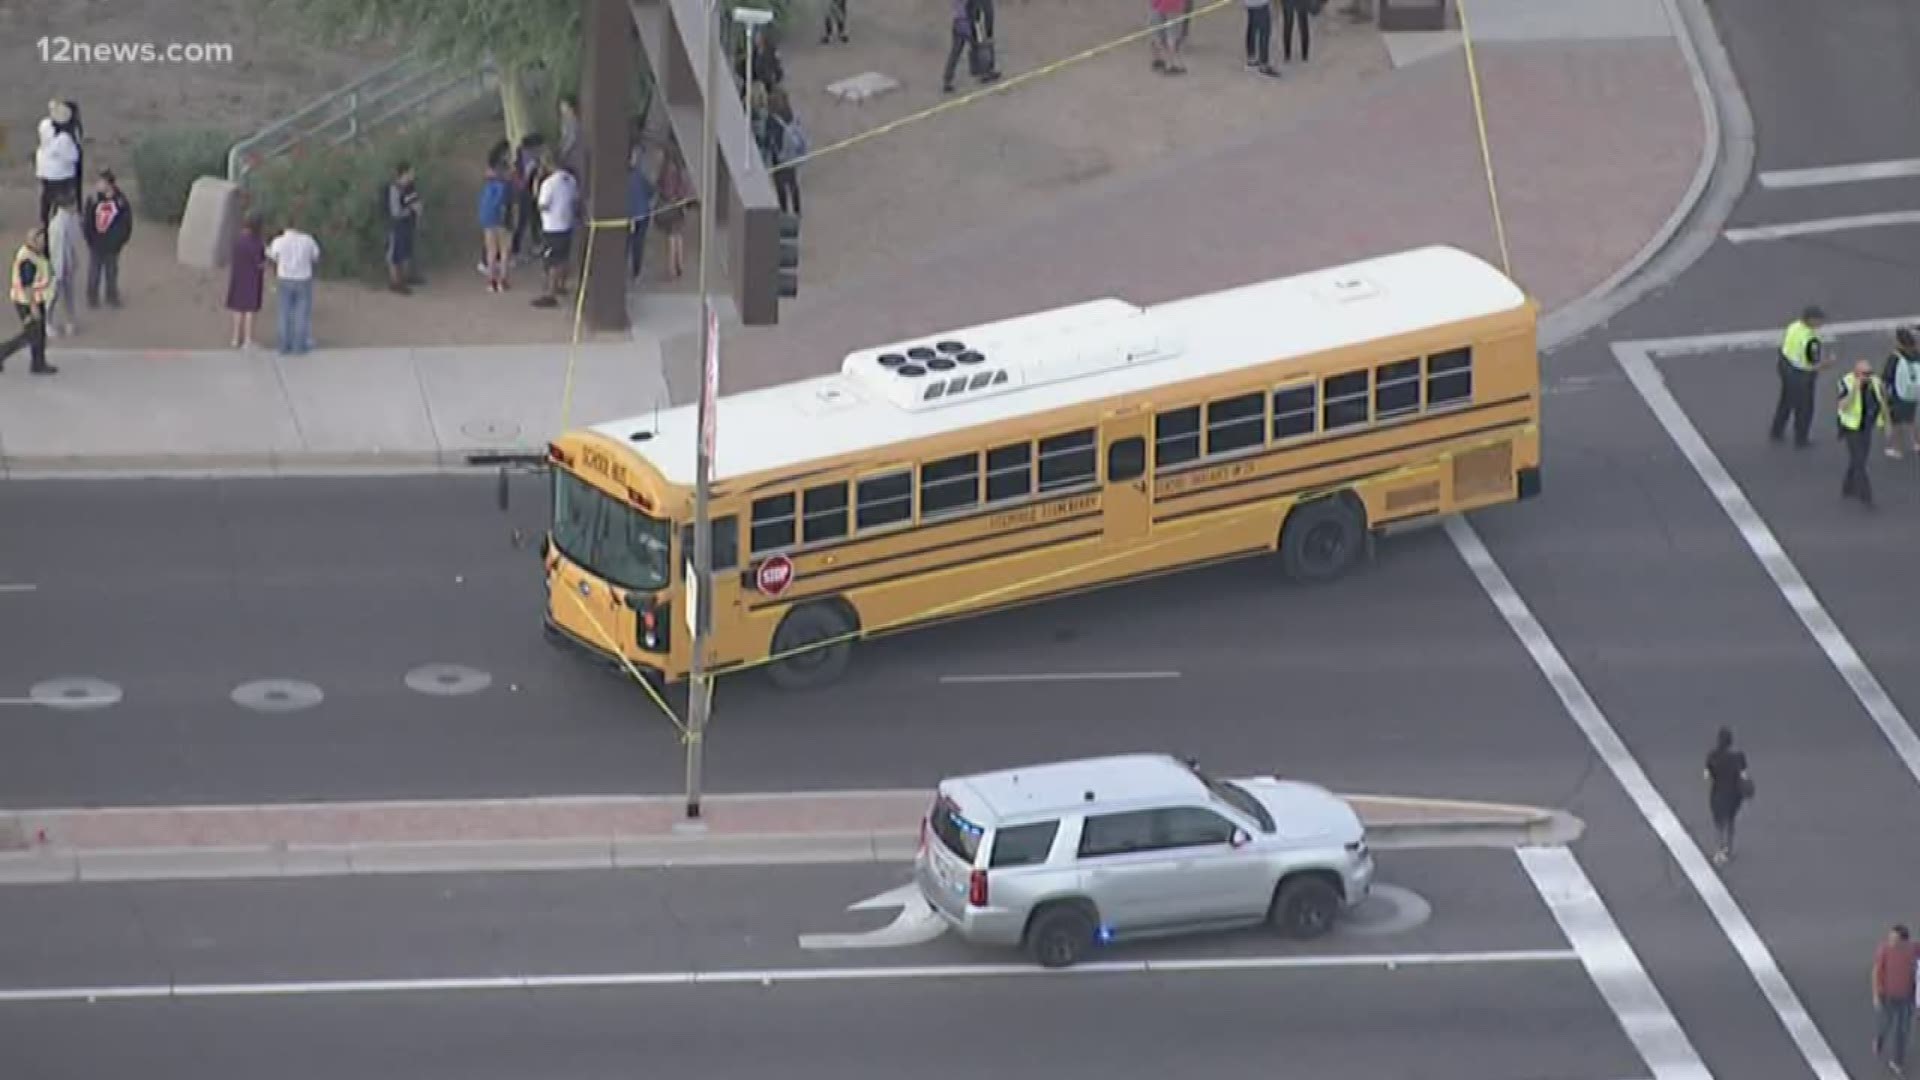 A 12-year-old boy has died after being hit by a school bus near 144th Avenue and Indian School Road in Goodyear on Friday afternoon.